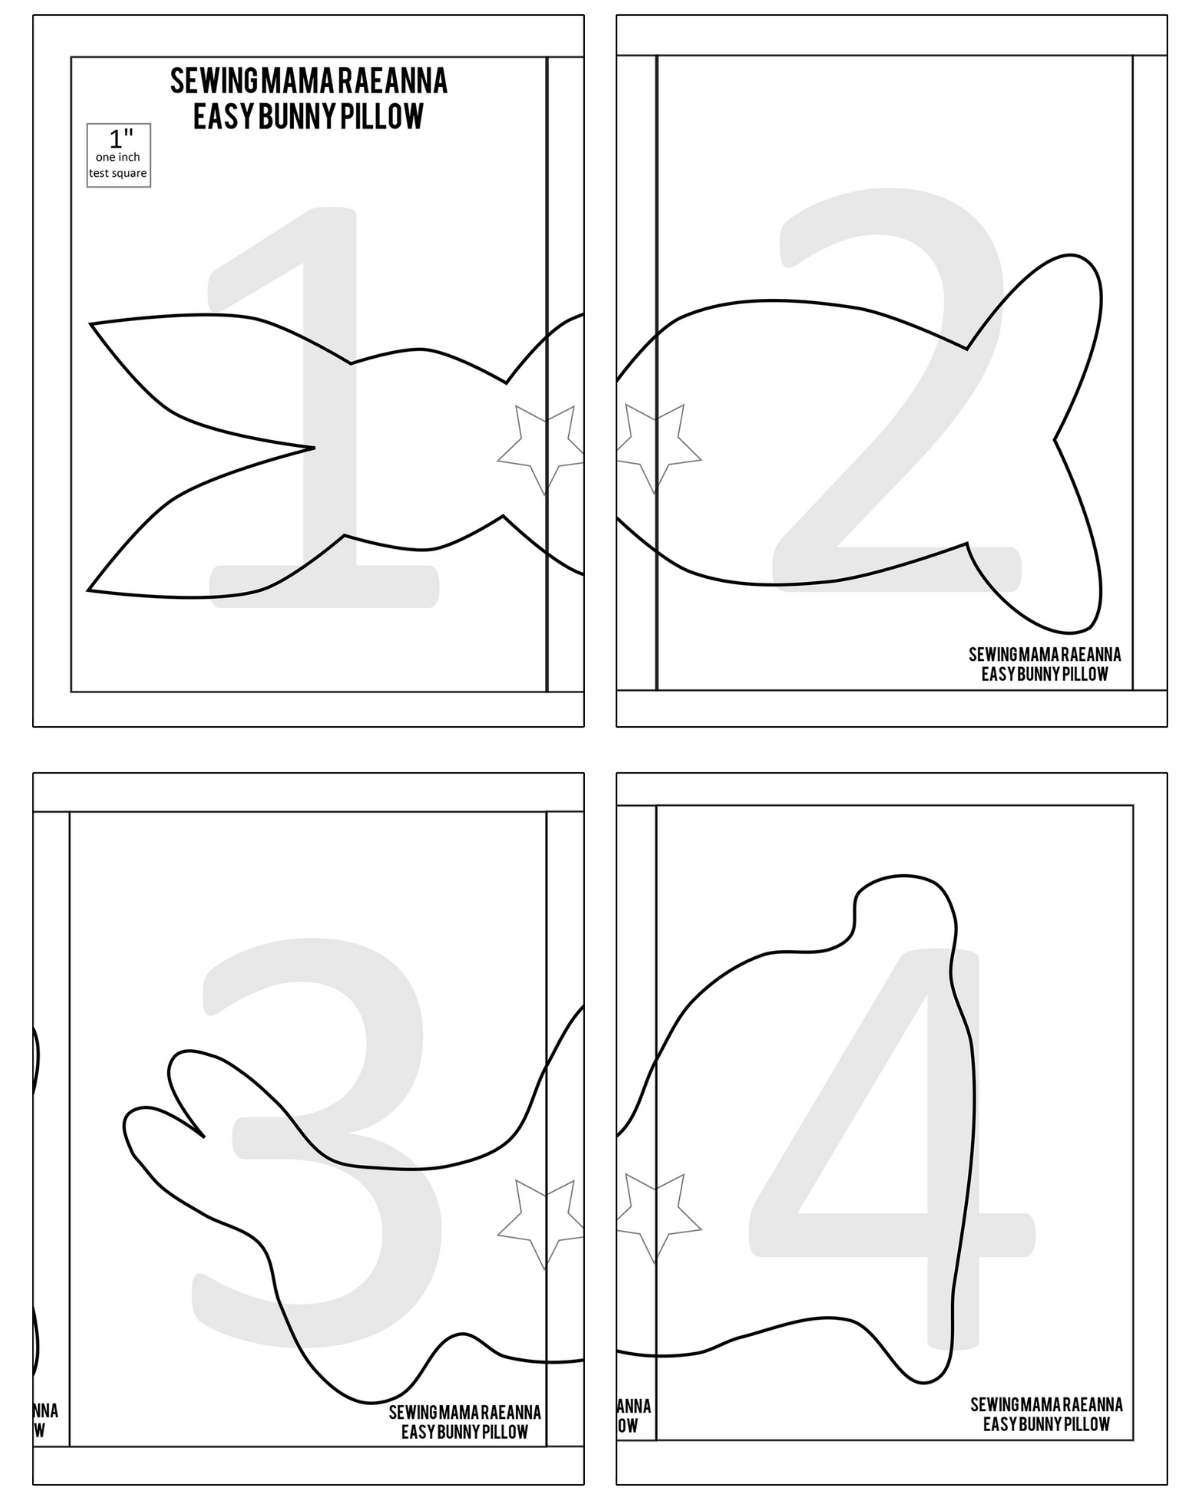 Image of 4 printable pattern pieces as they look if you print them.